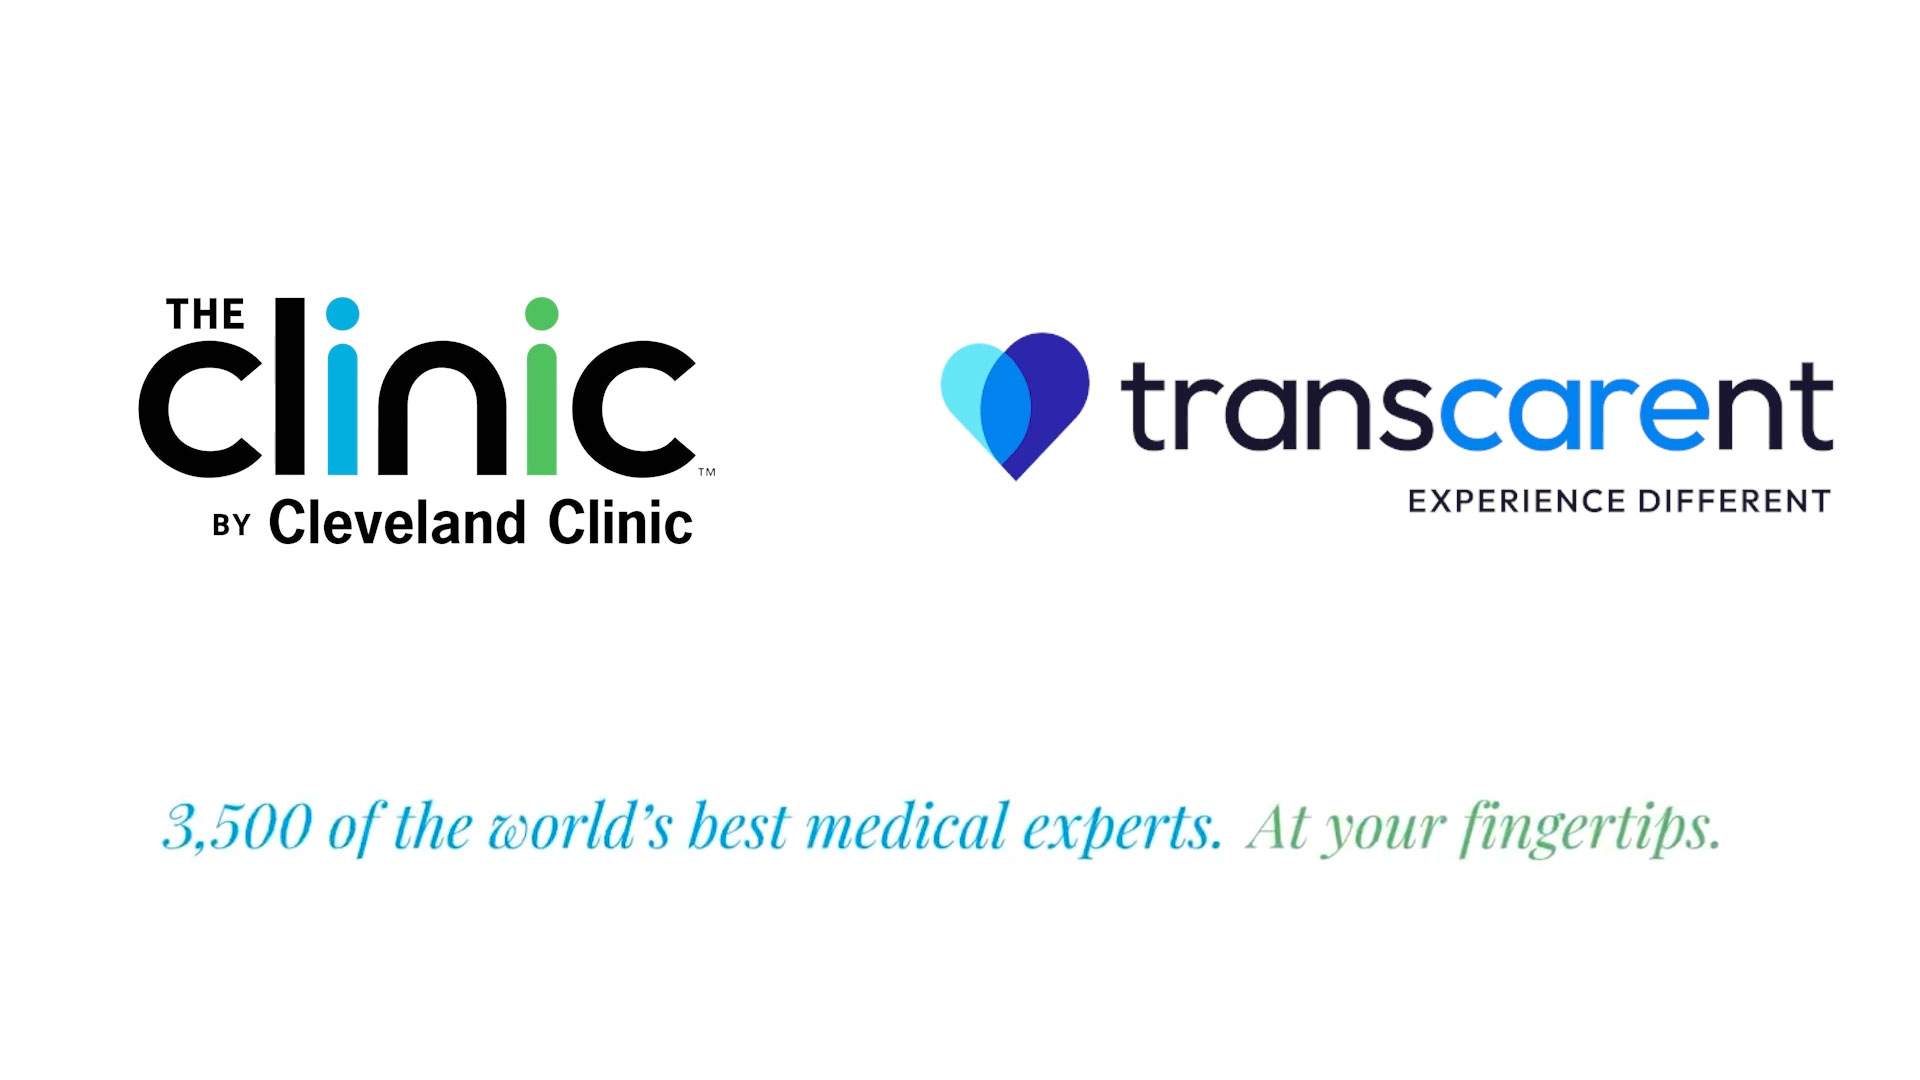 Transcarent's partnership with The Clinic by Cleveland Clinic brings Transcarent Members convenient, virtual access to Cleveland Clinic’s 3,500 world-renowned expert physicians in more than 550 advanced subspecialties for Expert Second Opinions on diagnoses and treatment plans.